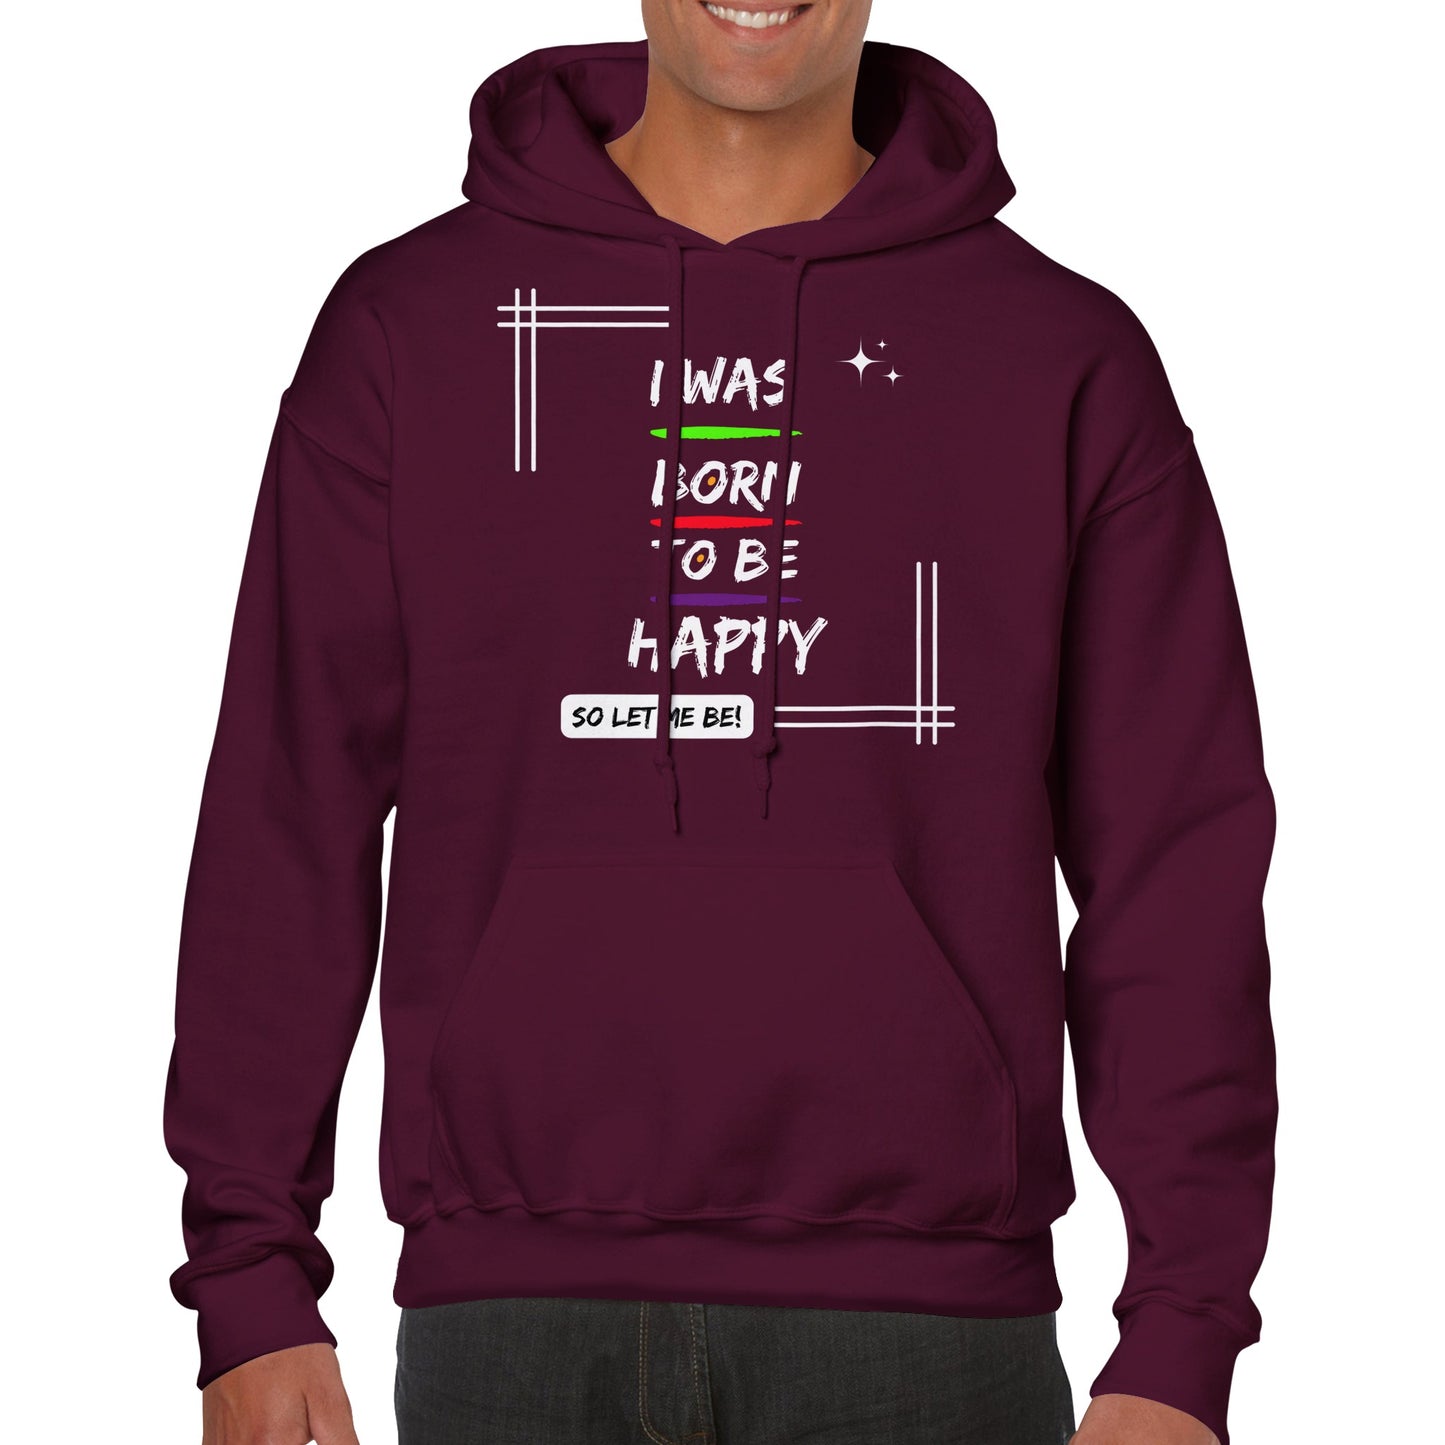 "I was born to be happy, so let me be! - Inspirational Quote Unisex Hoodie